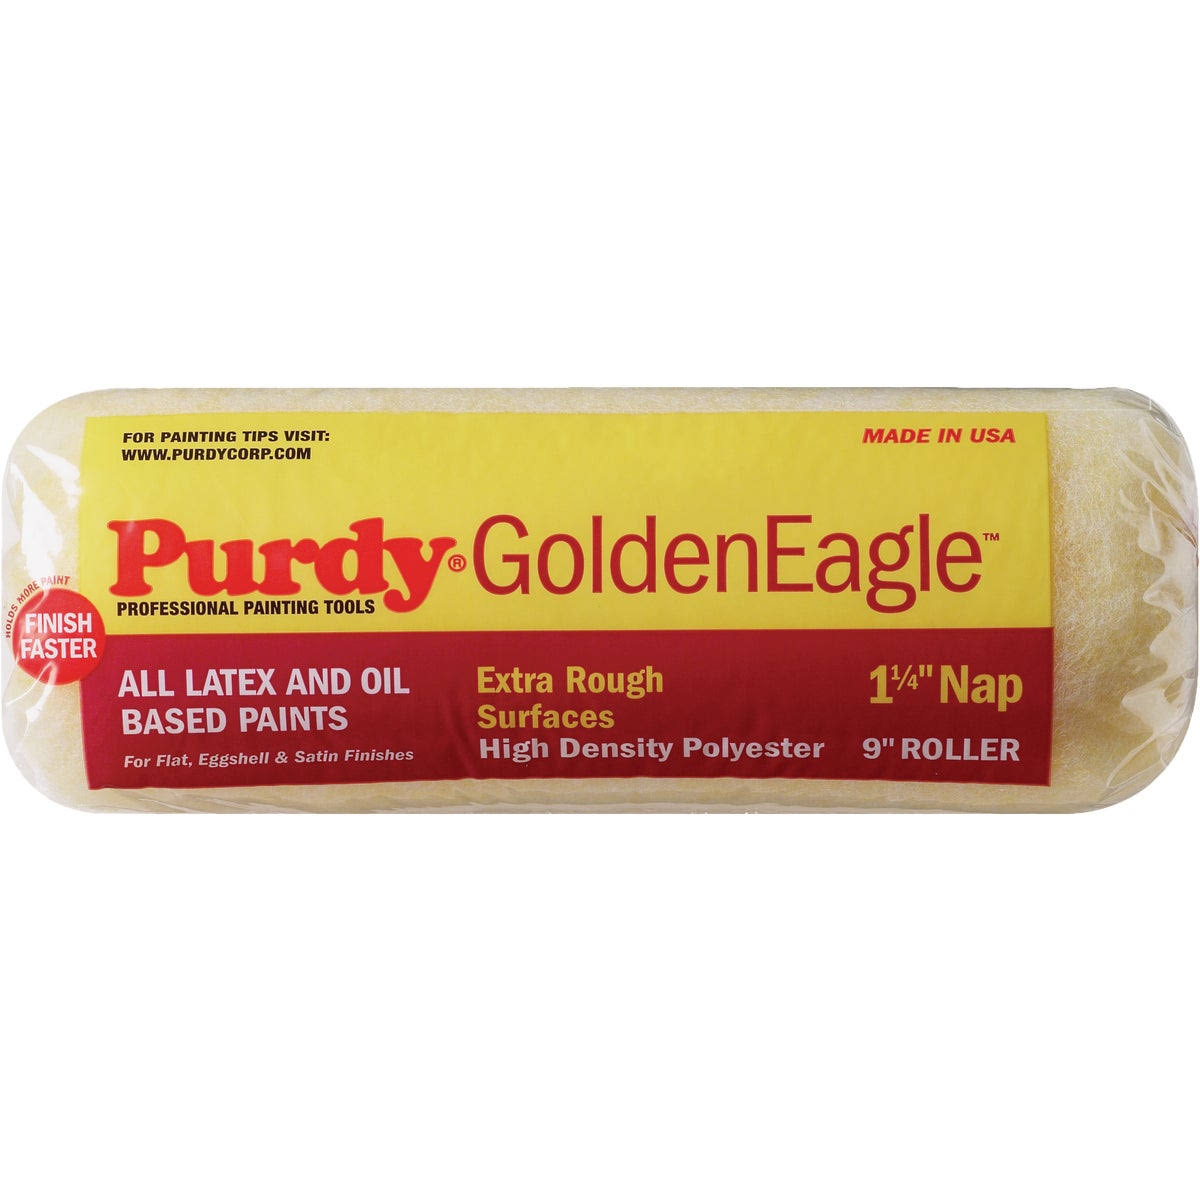 Purdy Golden Eagle Roller Cover - Polyester